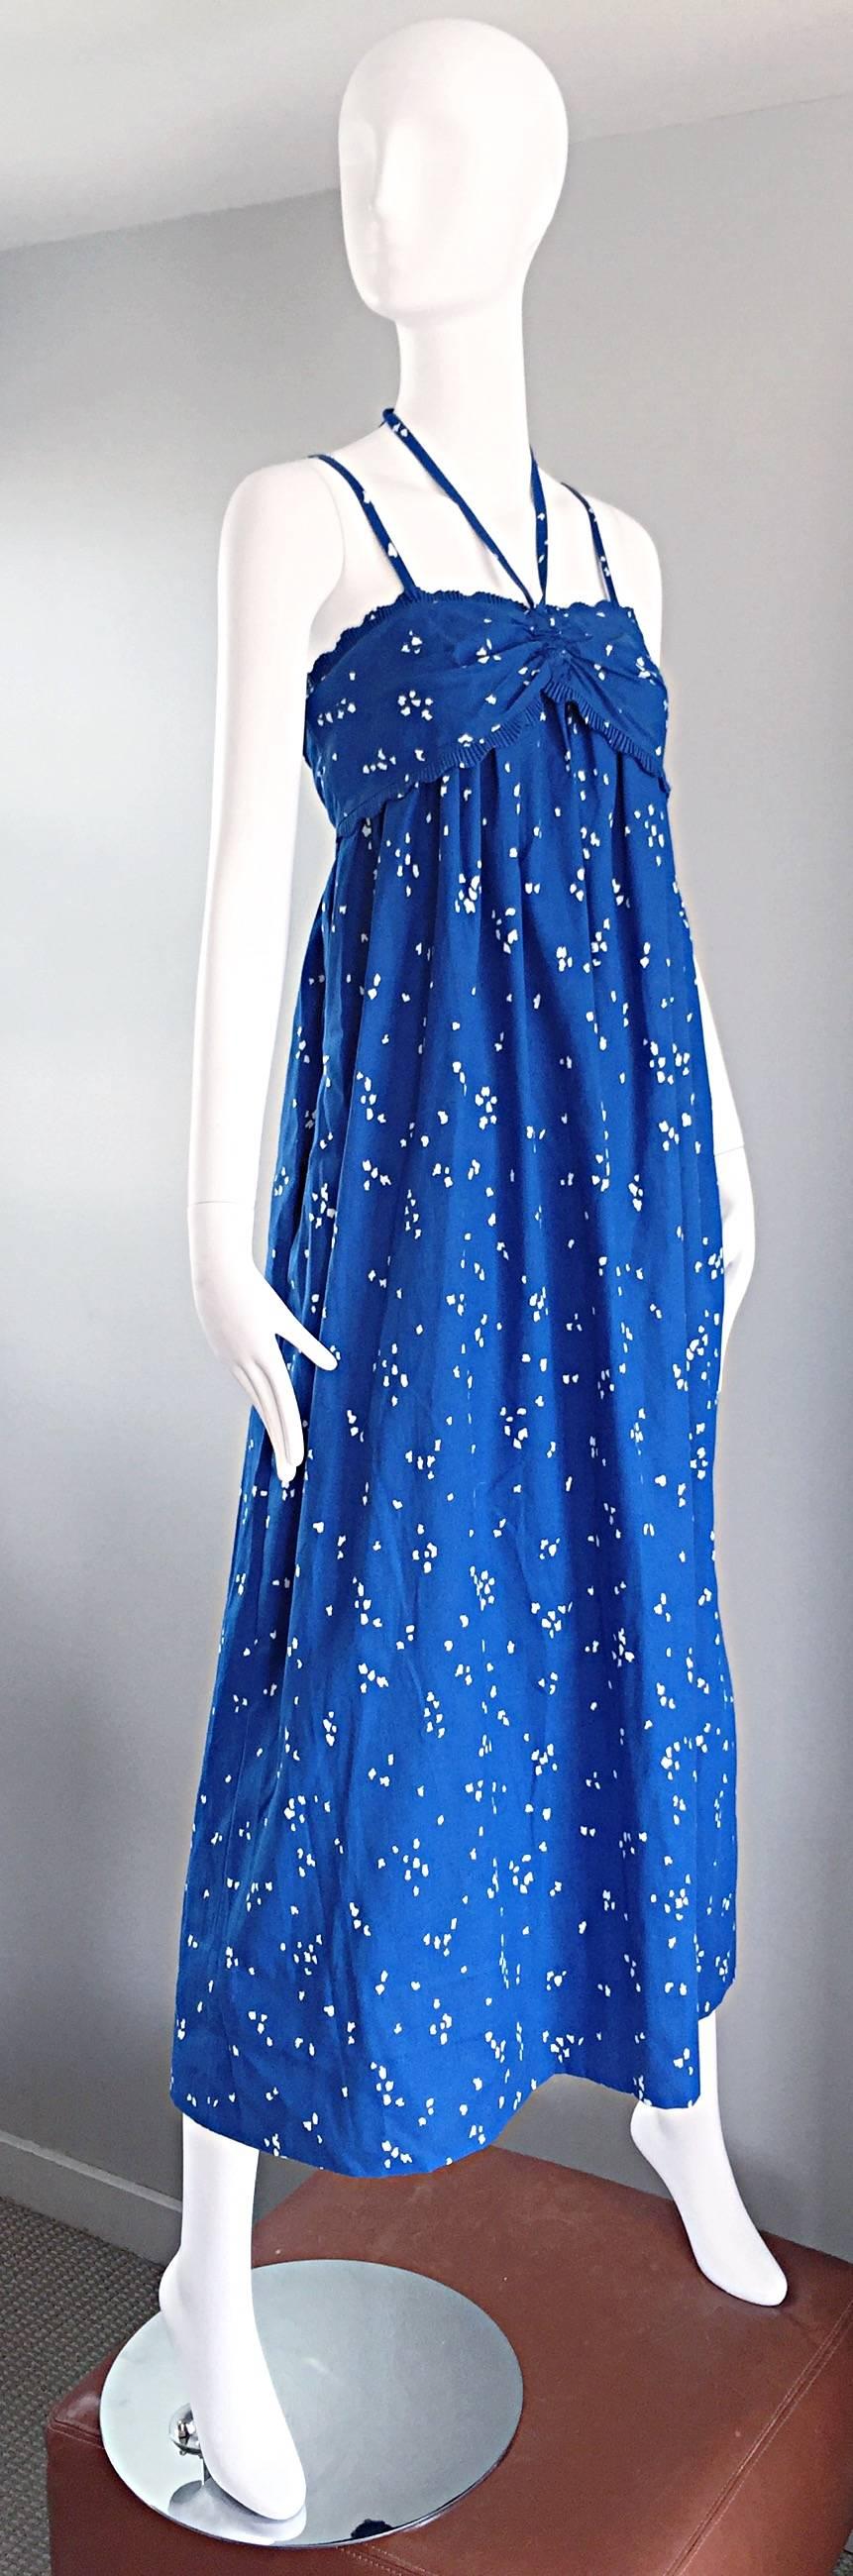 Women's Bill Tice For I Magnin 1970s Hand Painted Blue + White 70s Halter Maxi Dress 